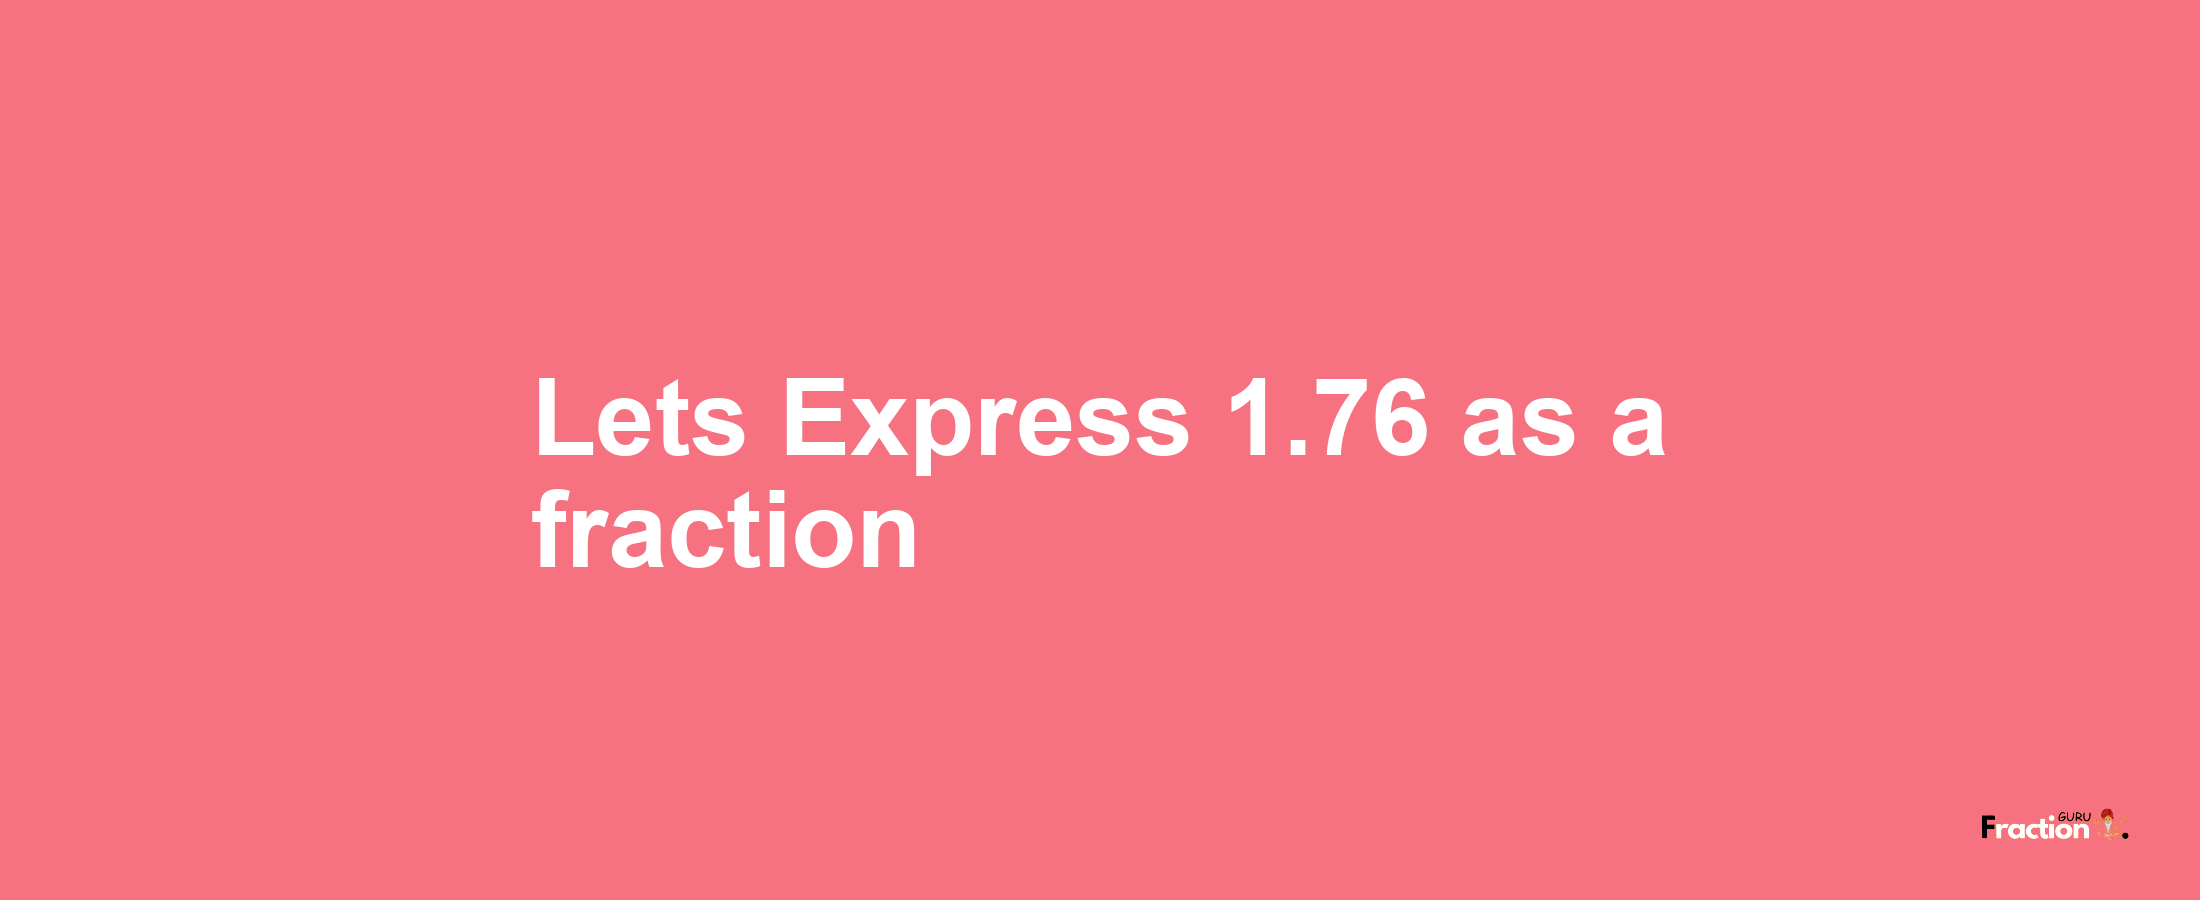 Lets Express 1.76 as afraction